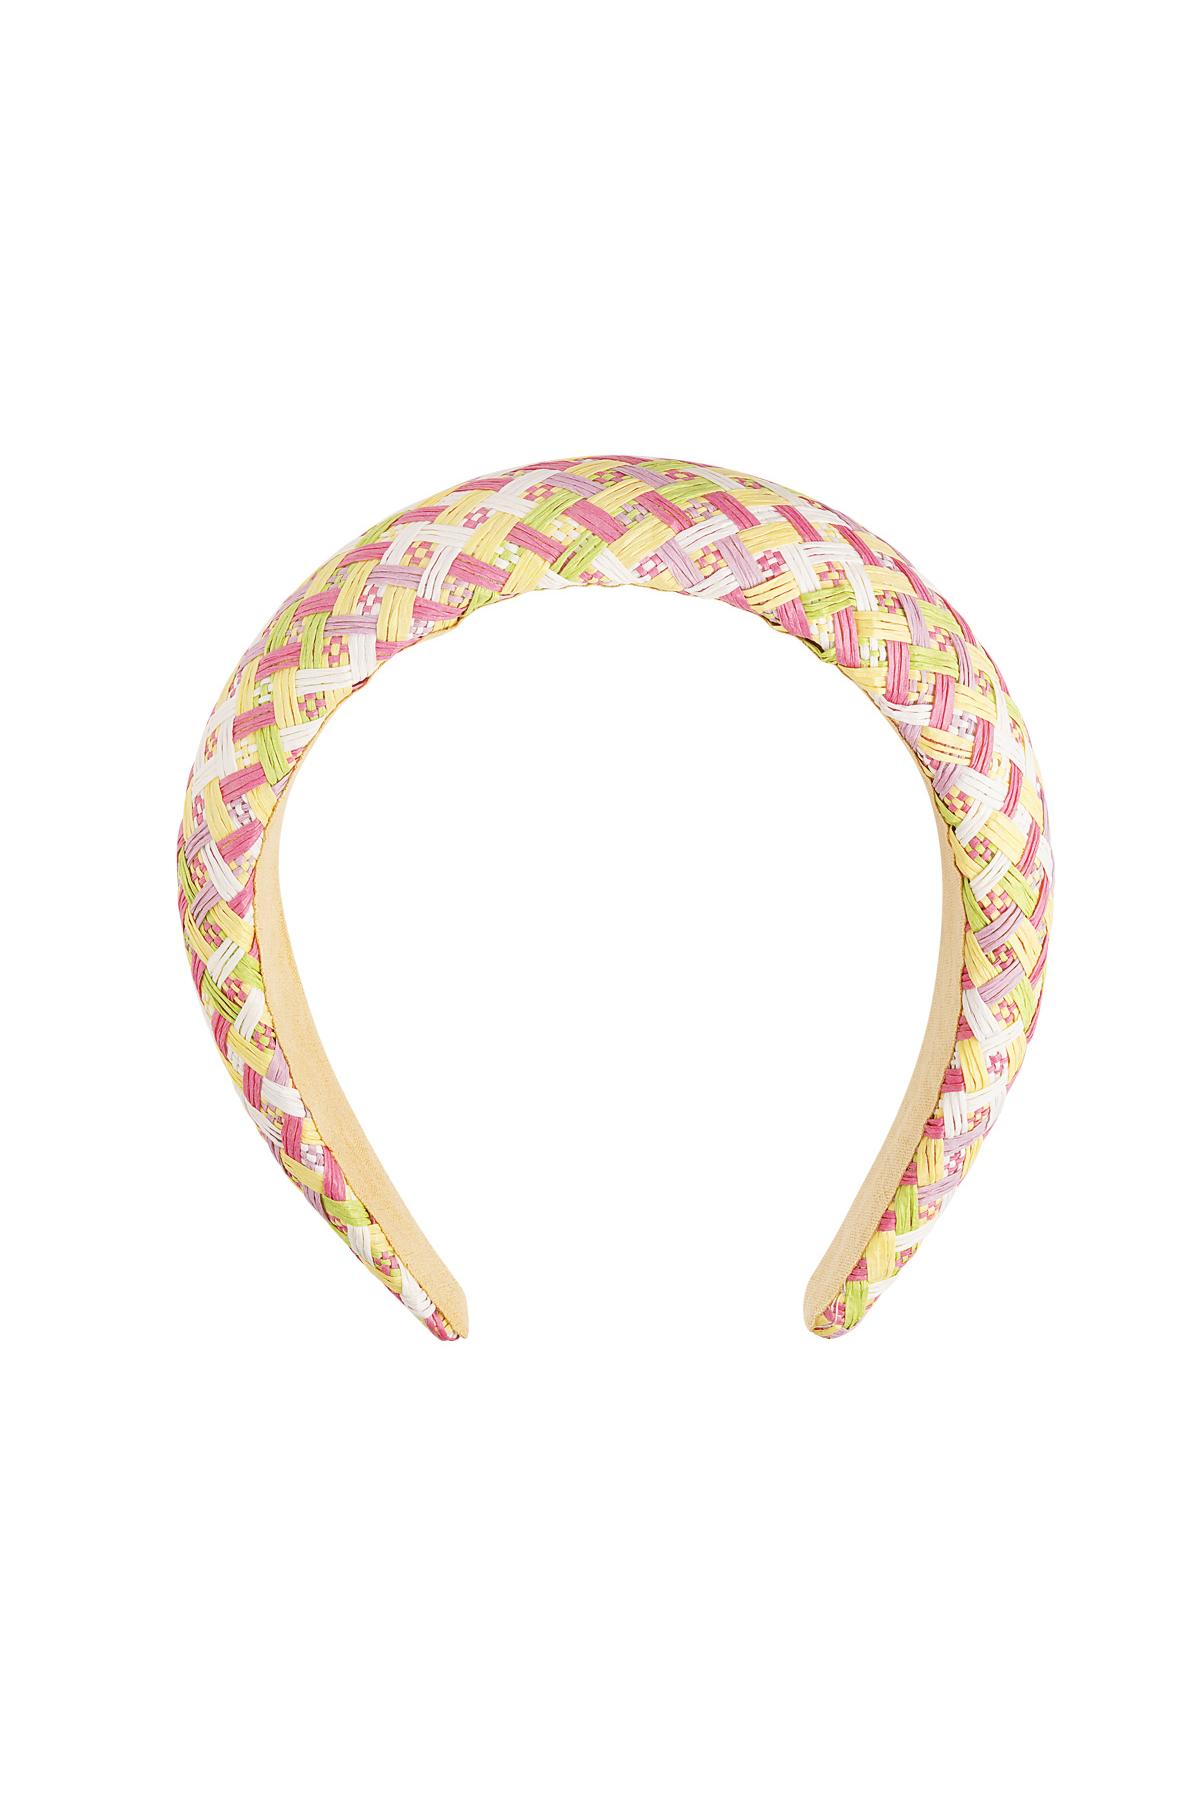 Hair band multi-colored Fabric h5 